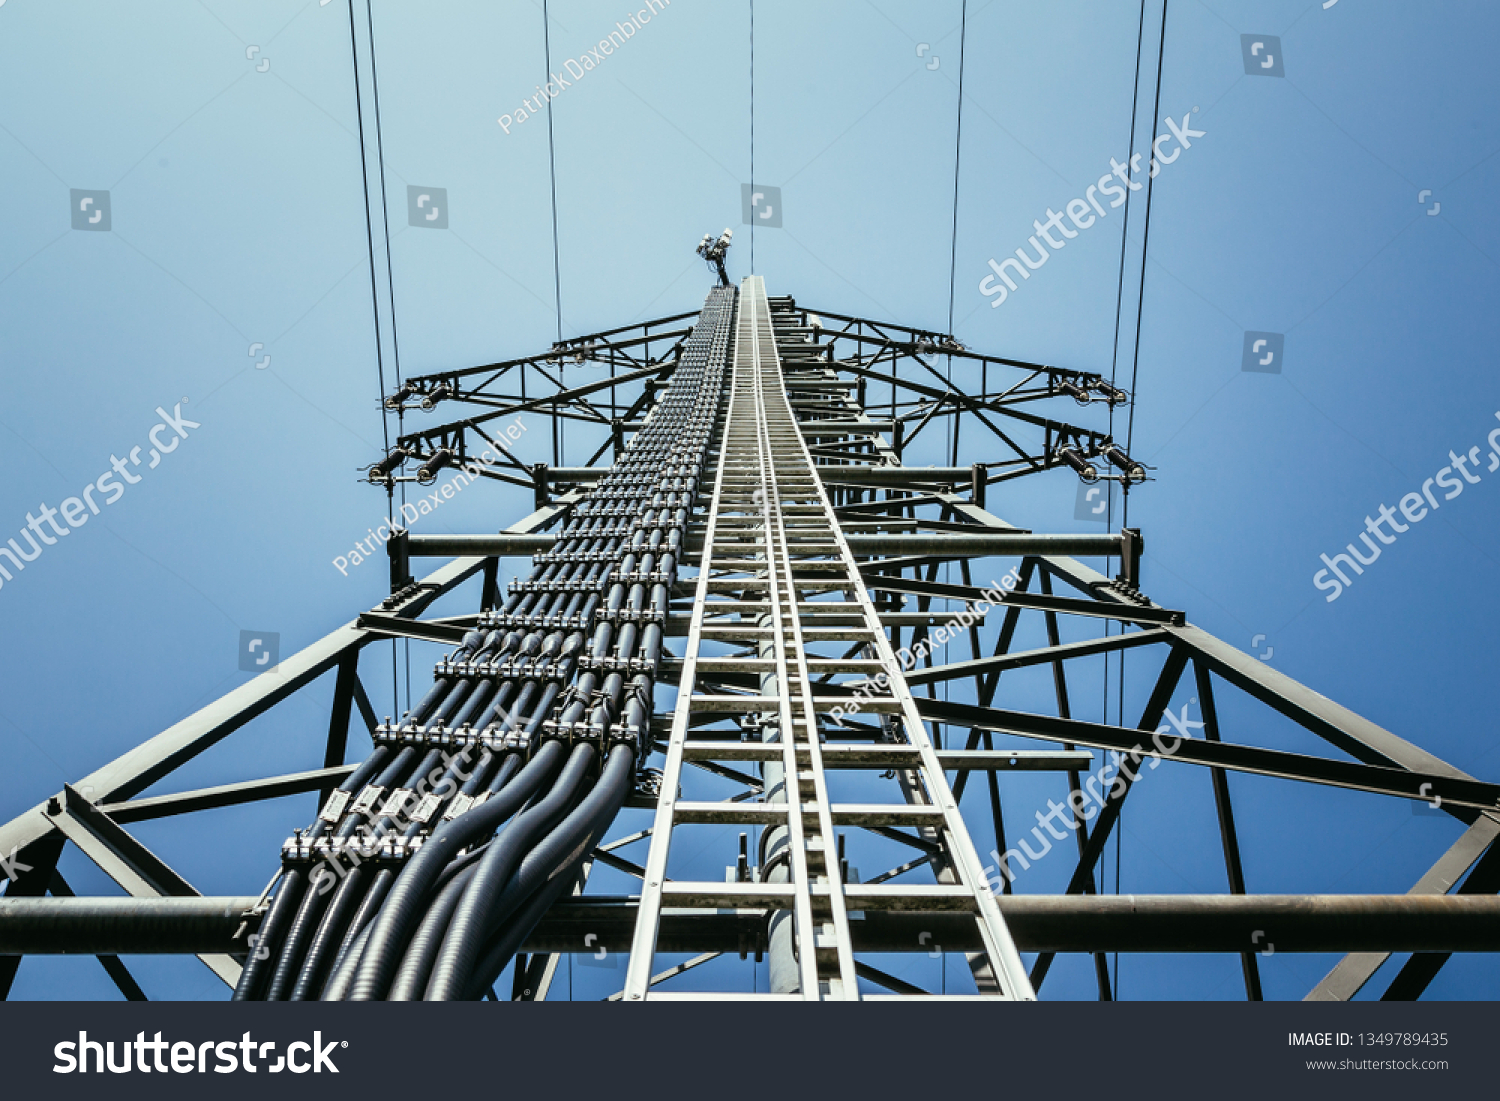 Picture of an electrical tower or pylon, blue sky in the background. Power grid or smart grid.  #1349789435